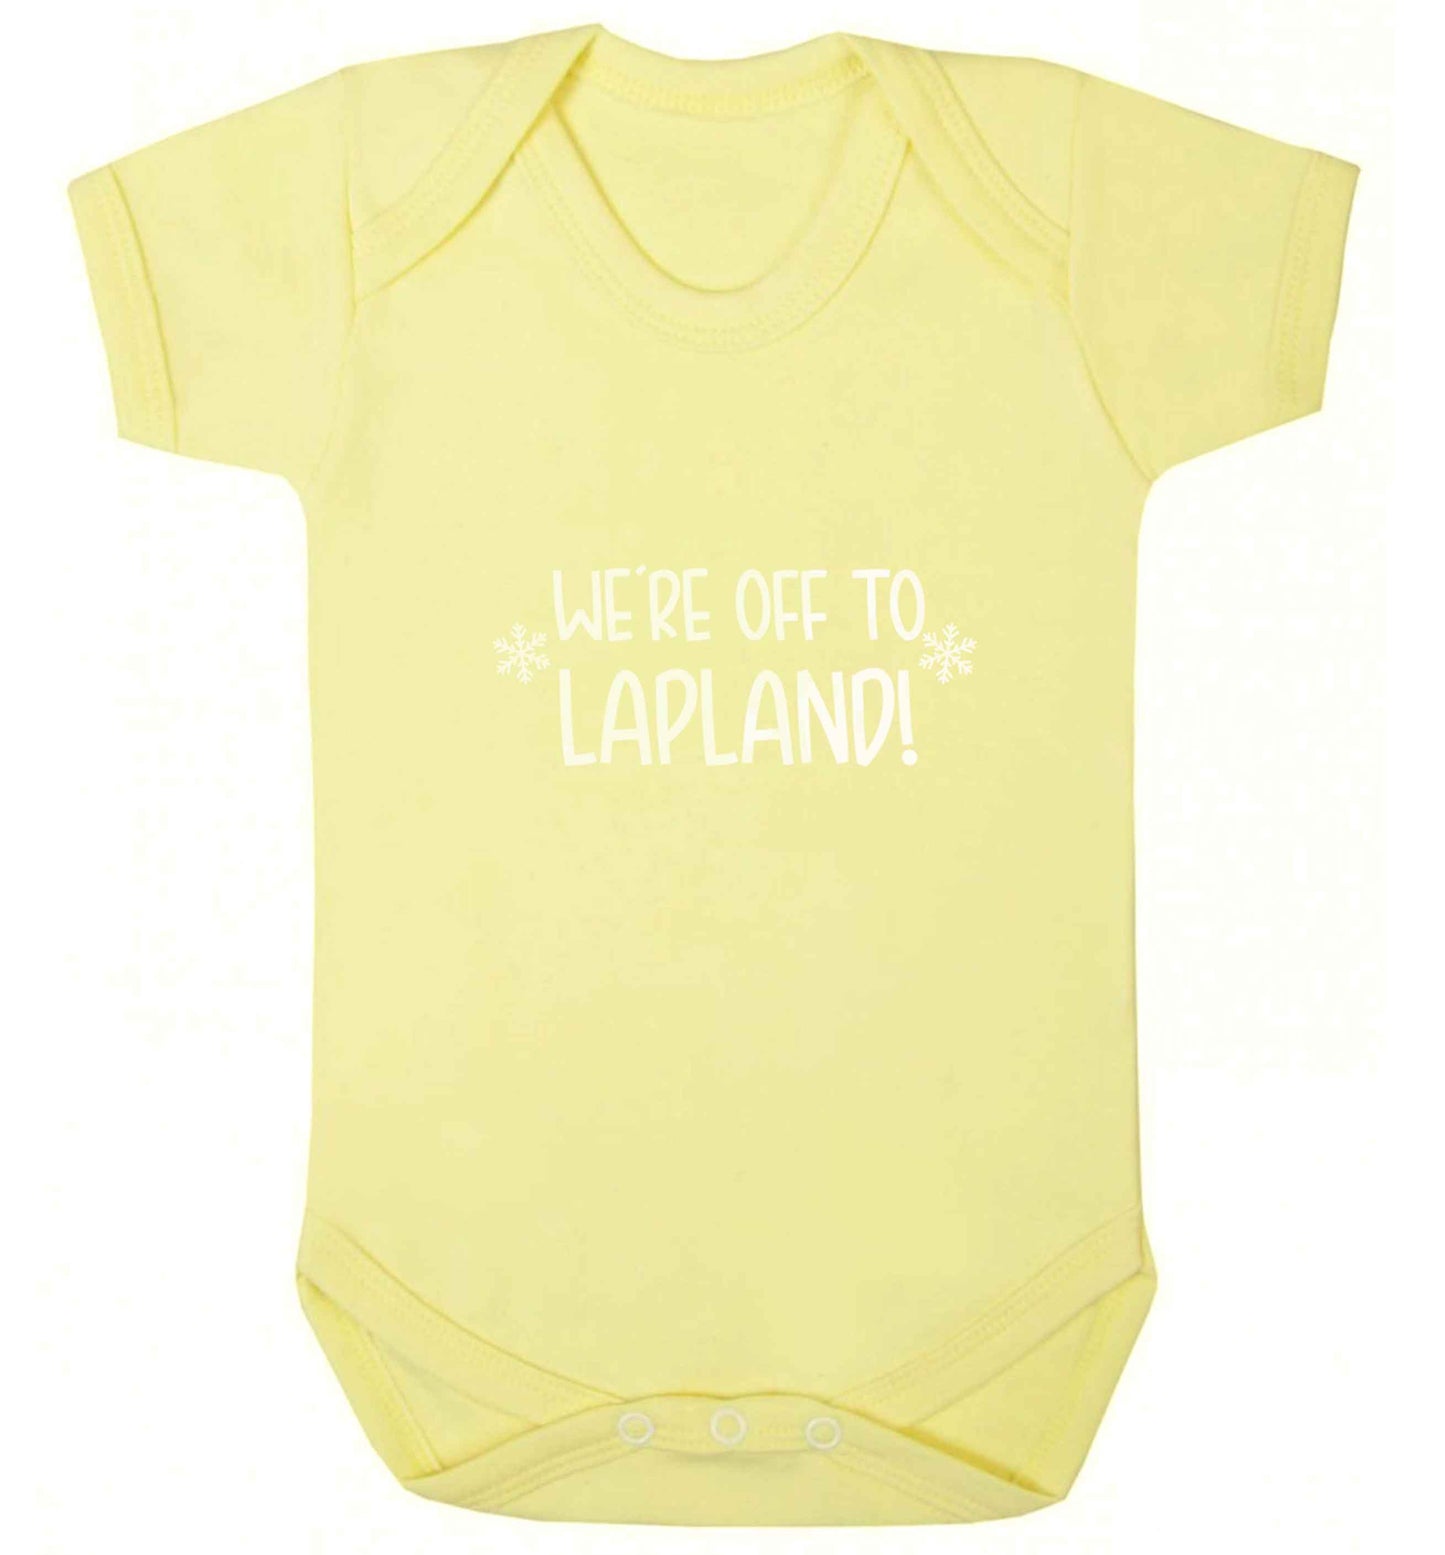 We're off to Lapland baby vest pale yellow 18-24 months